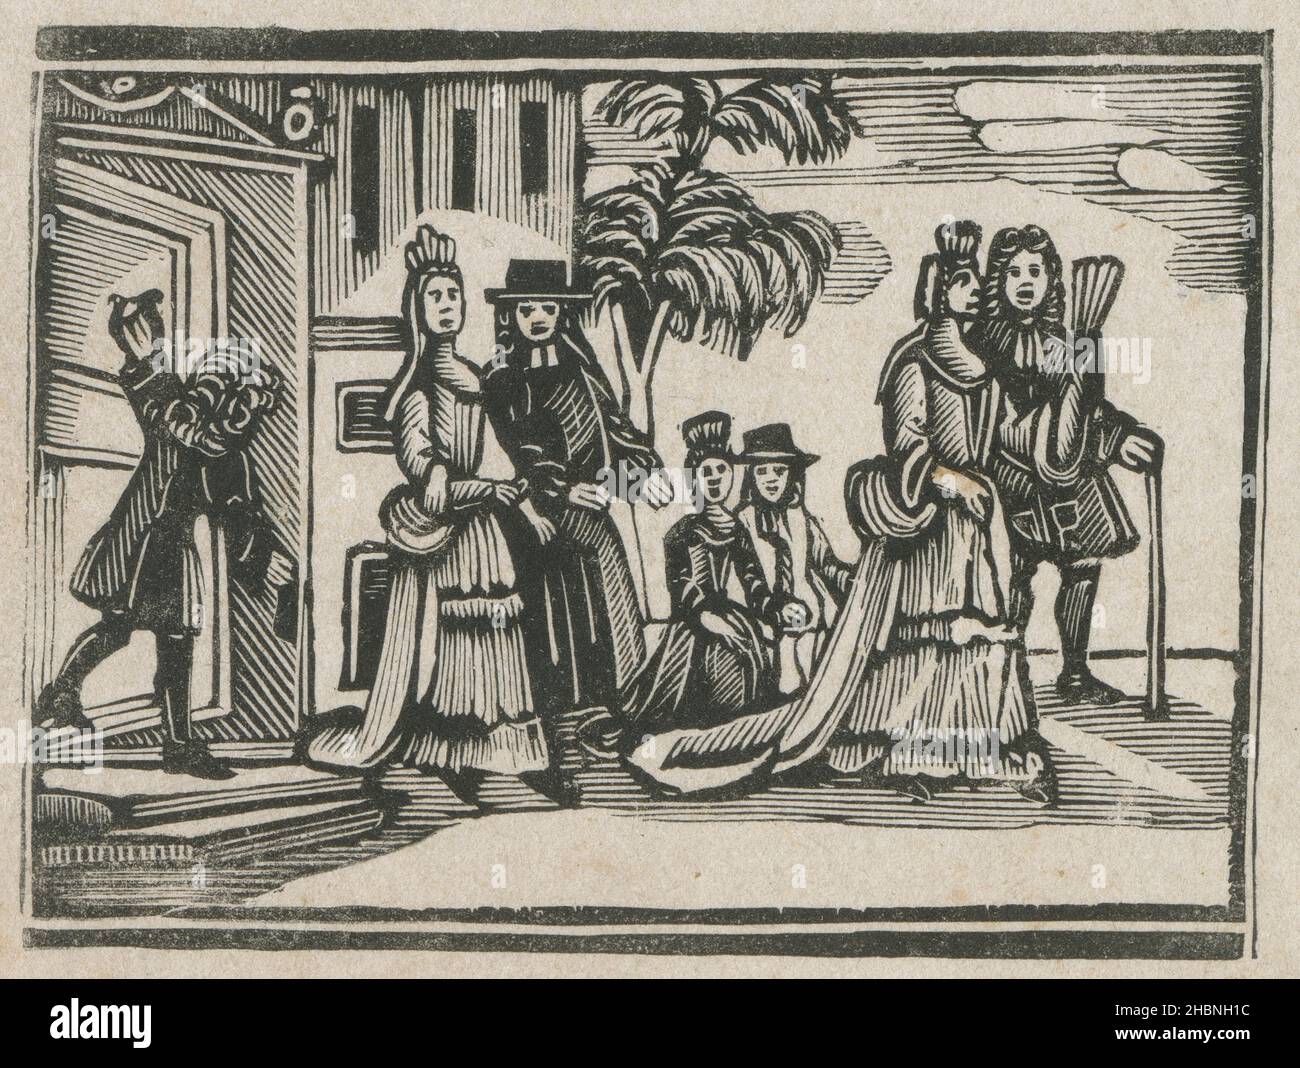 Antique 19th century woodcut engraving, 'Riches Walking Out' depicting Riches with wife and children and chaplain and lady's maid, reproduced from 'The Pious Youth's Recreation; containing a pleasant historical relation of the families of Riches and Poverty, Godliness and Labor' (1711). SOURCE: ORIGINAL ENGRAVING Stock Photo